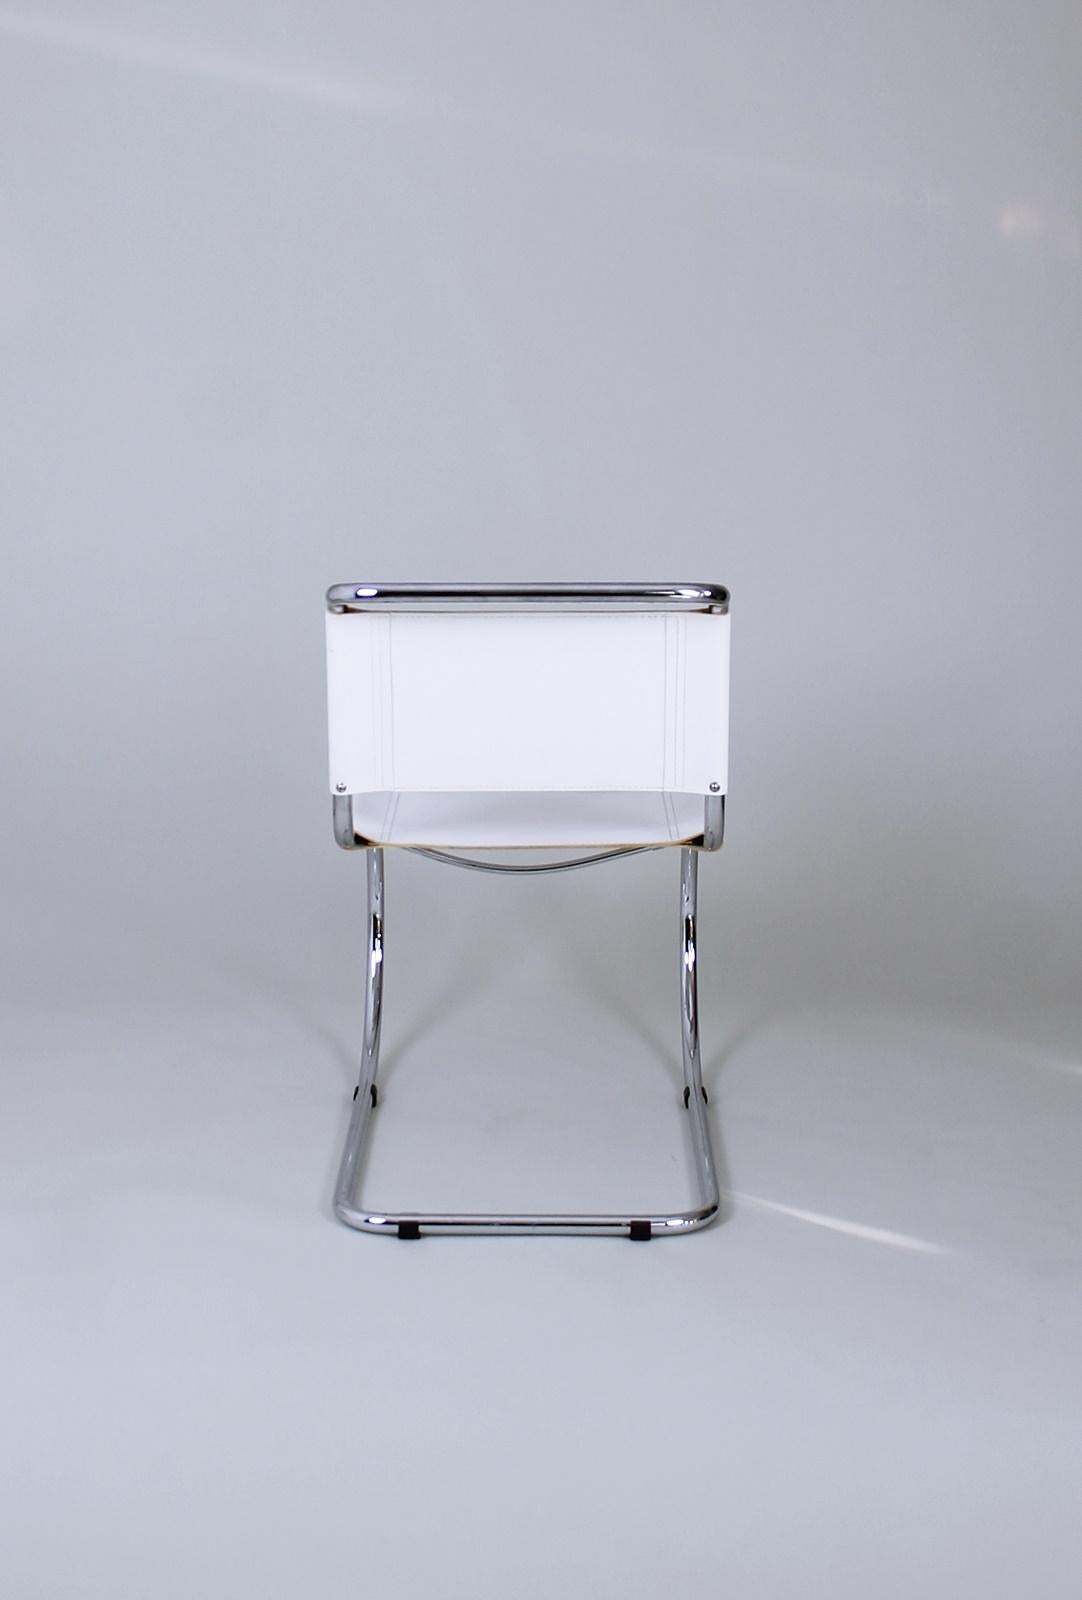 Bauhaus Classic MR 10 Chairs by Ludwig Mies van der Rohe Germany, 1980s For Sale 1